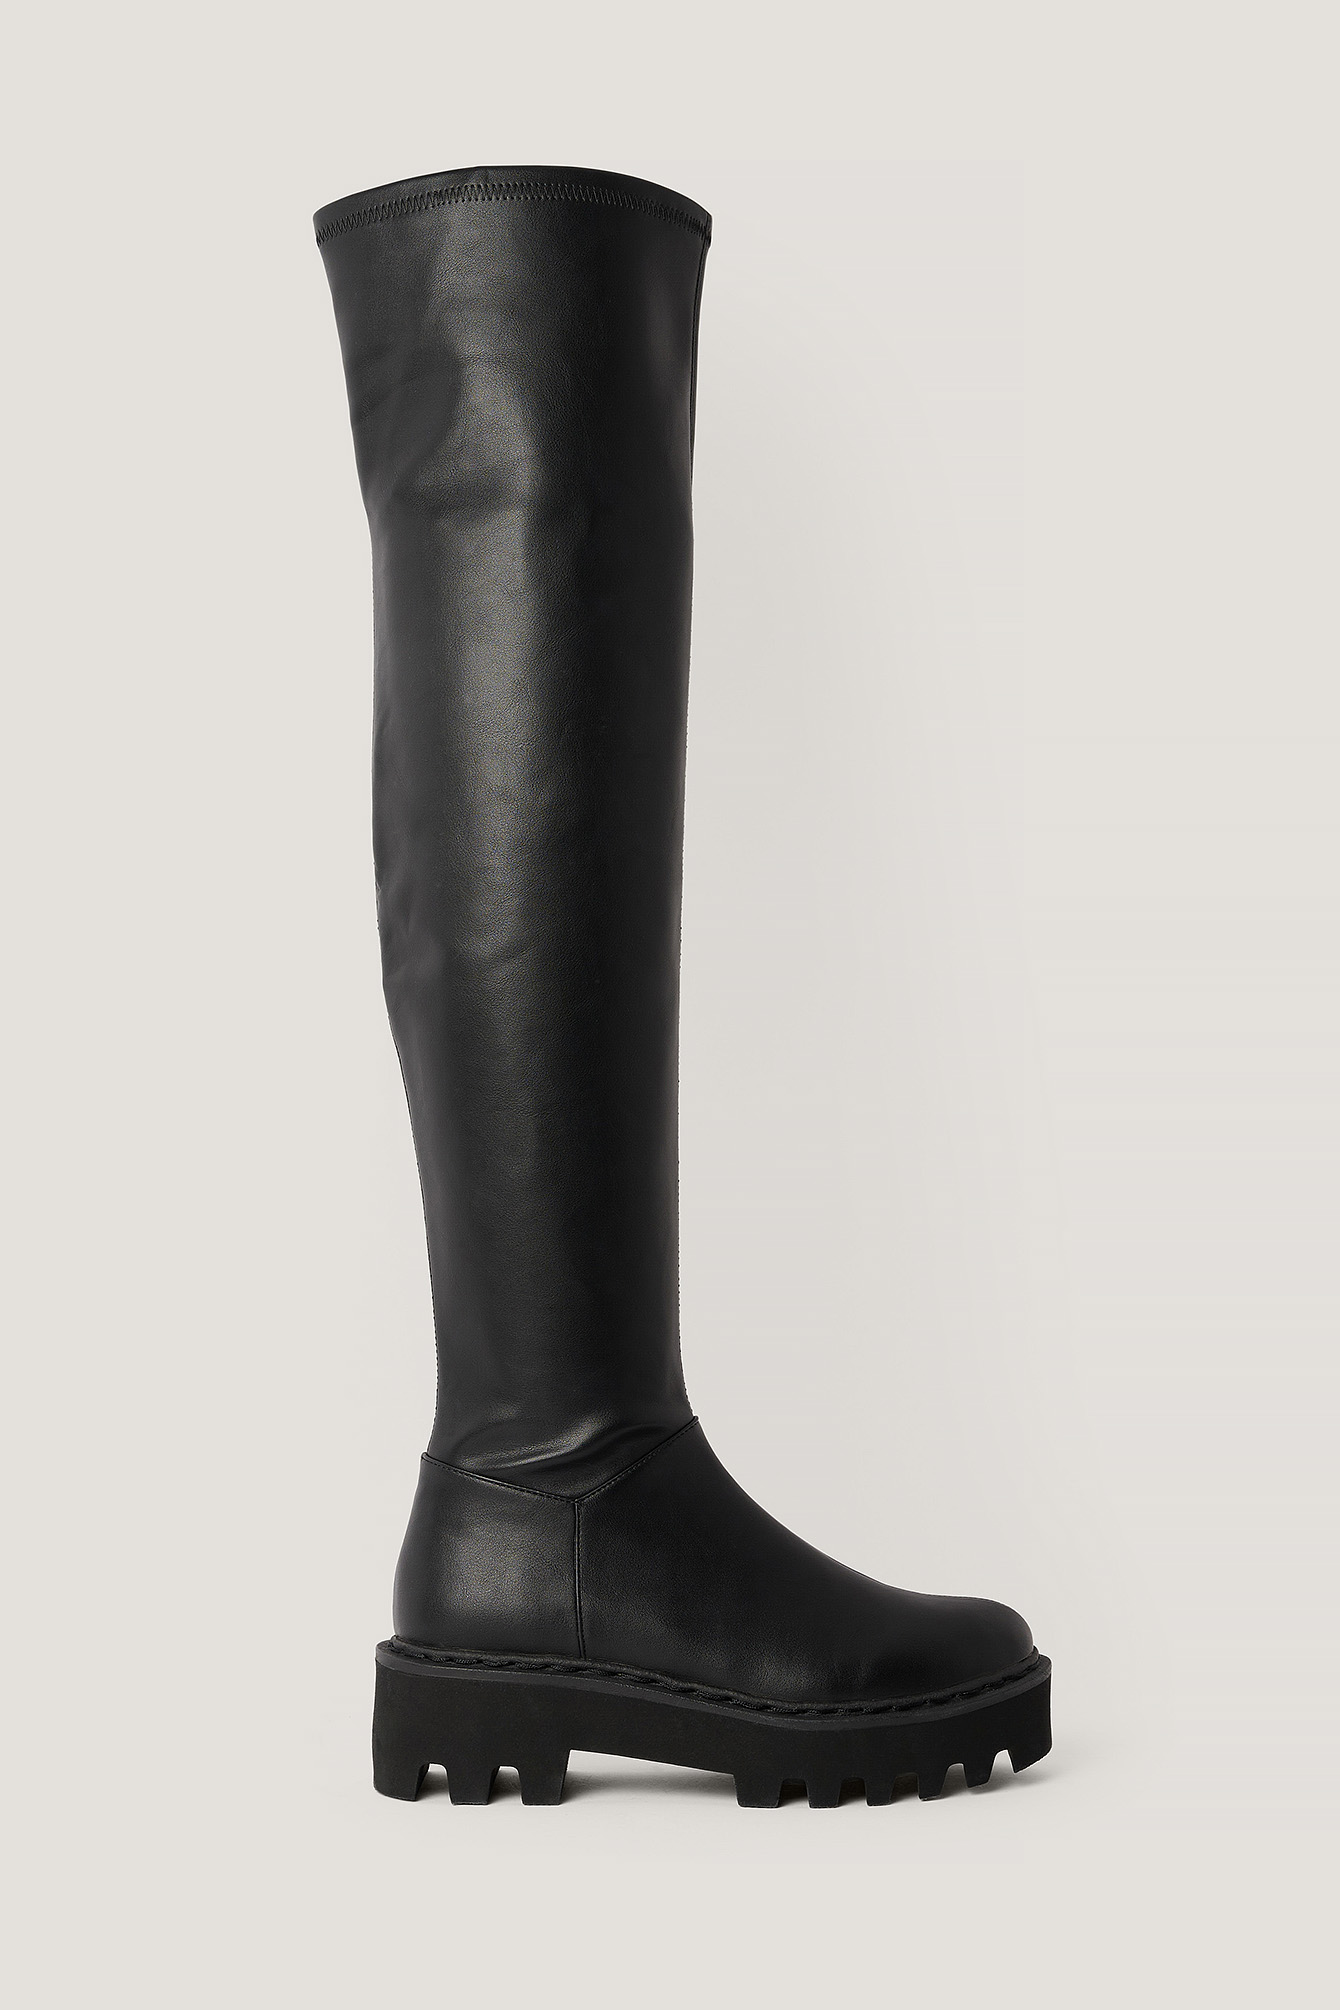 Thigh High Profile Sole Boots Black | NA-KD